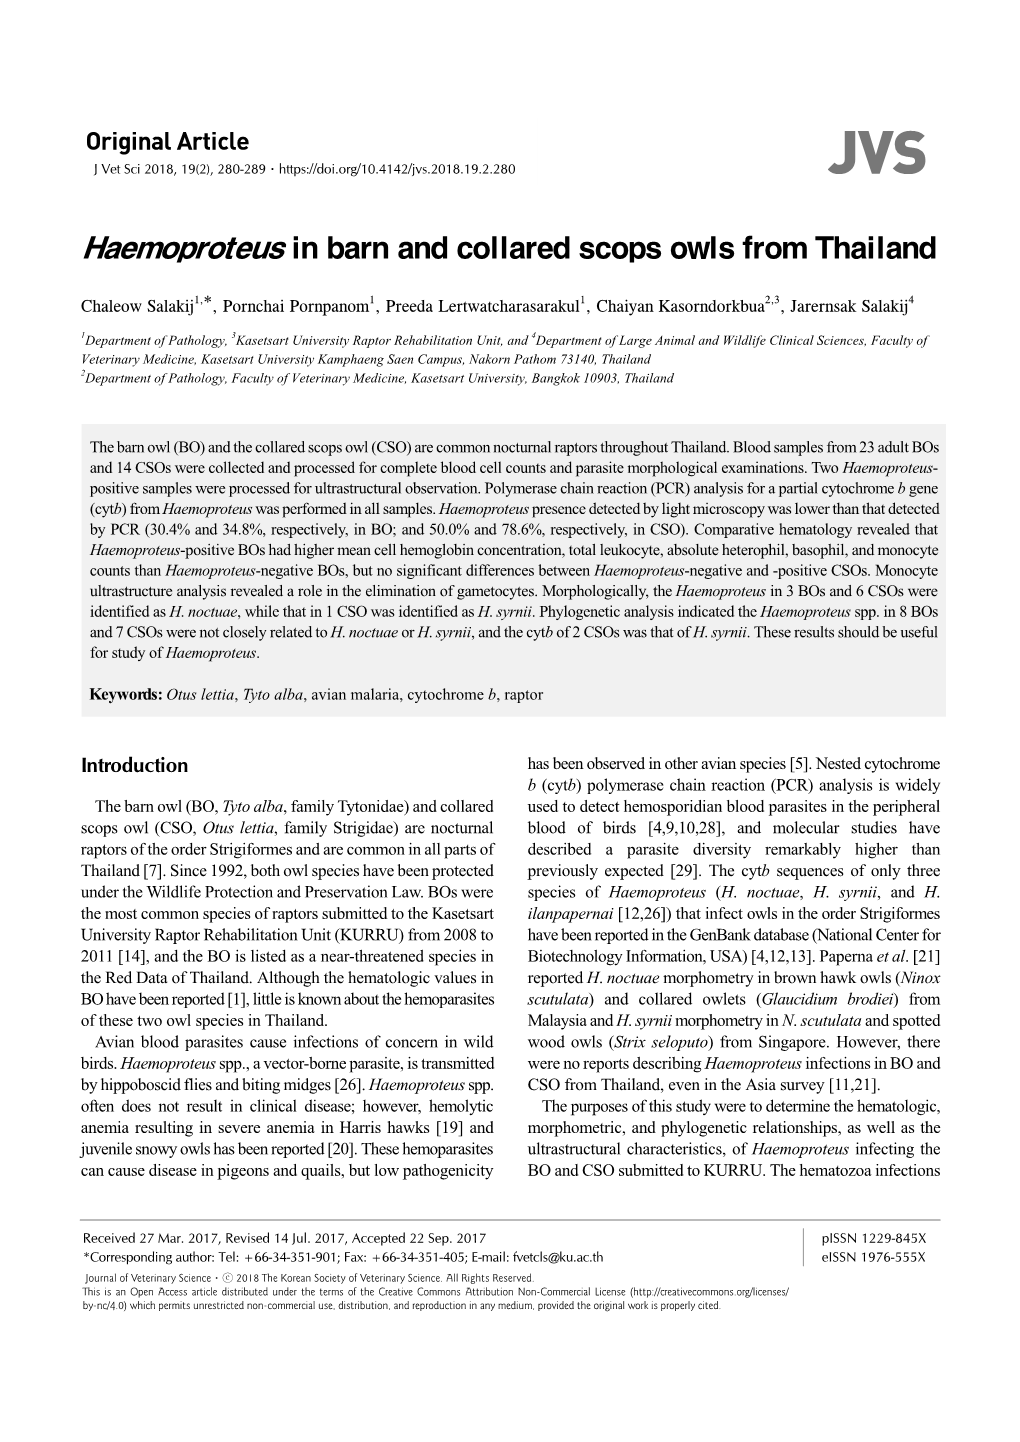 Haemoproteus in Barn and Collared Scops Owls from Thailand